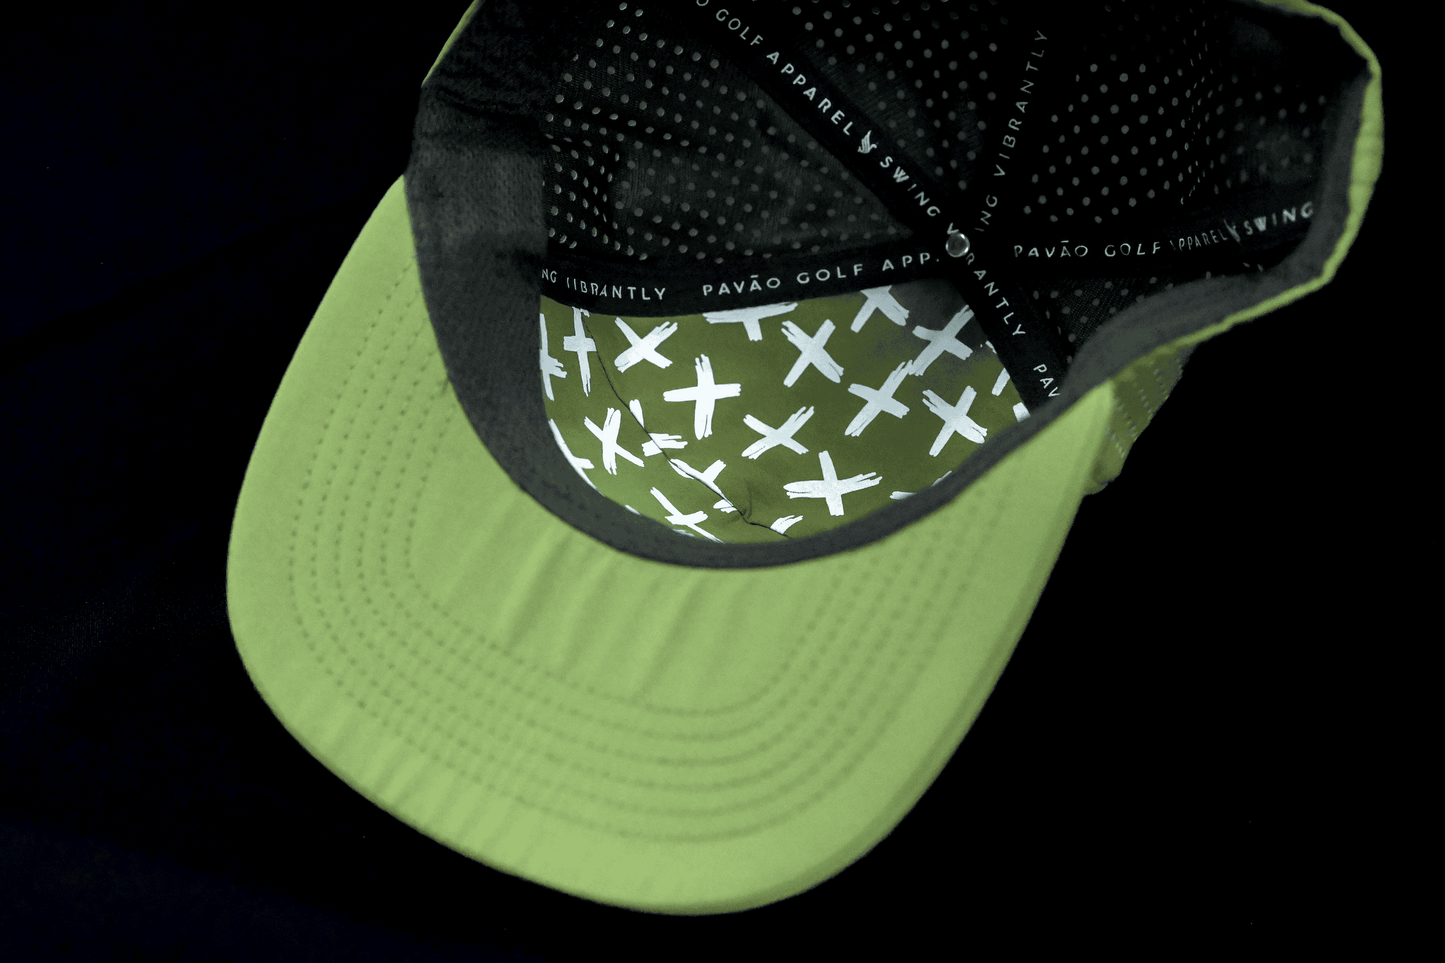 Olive Green Swing Vibrantly Hat